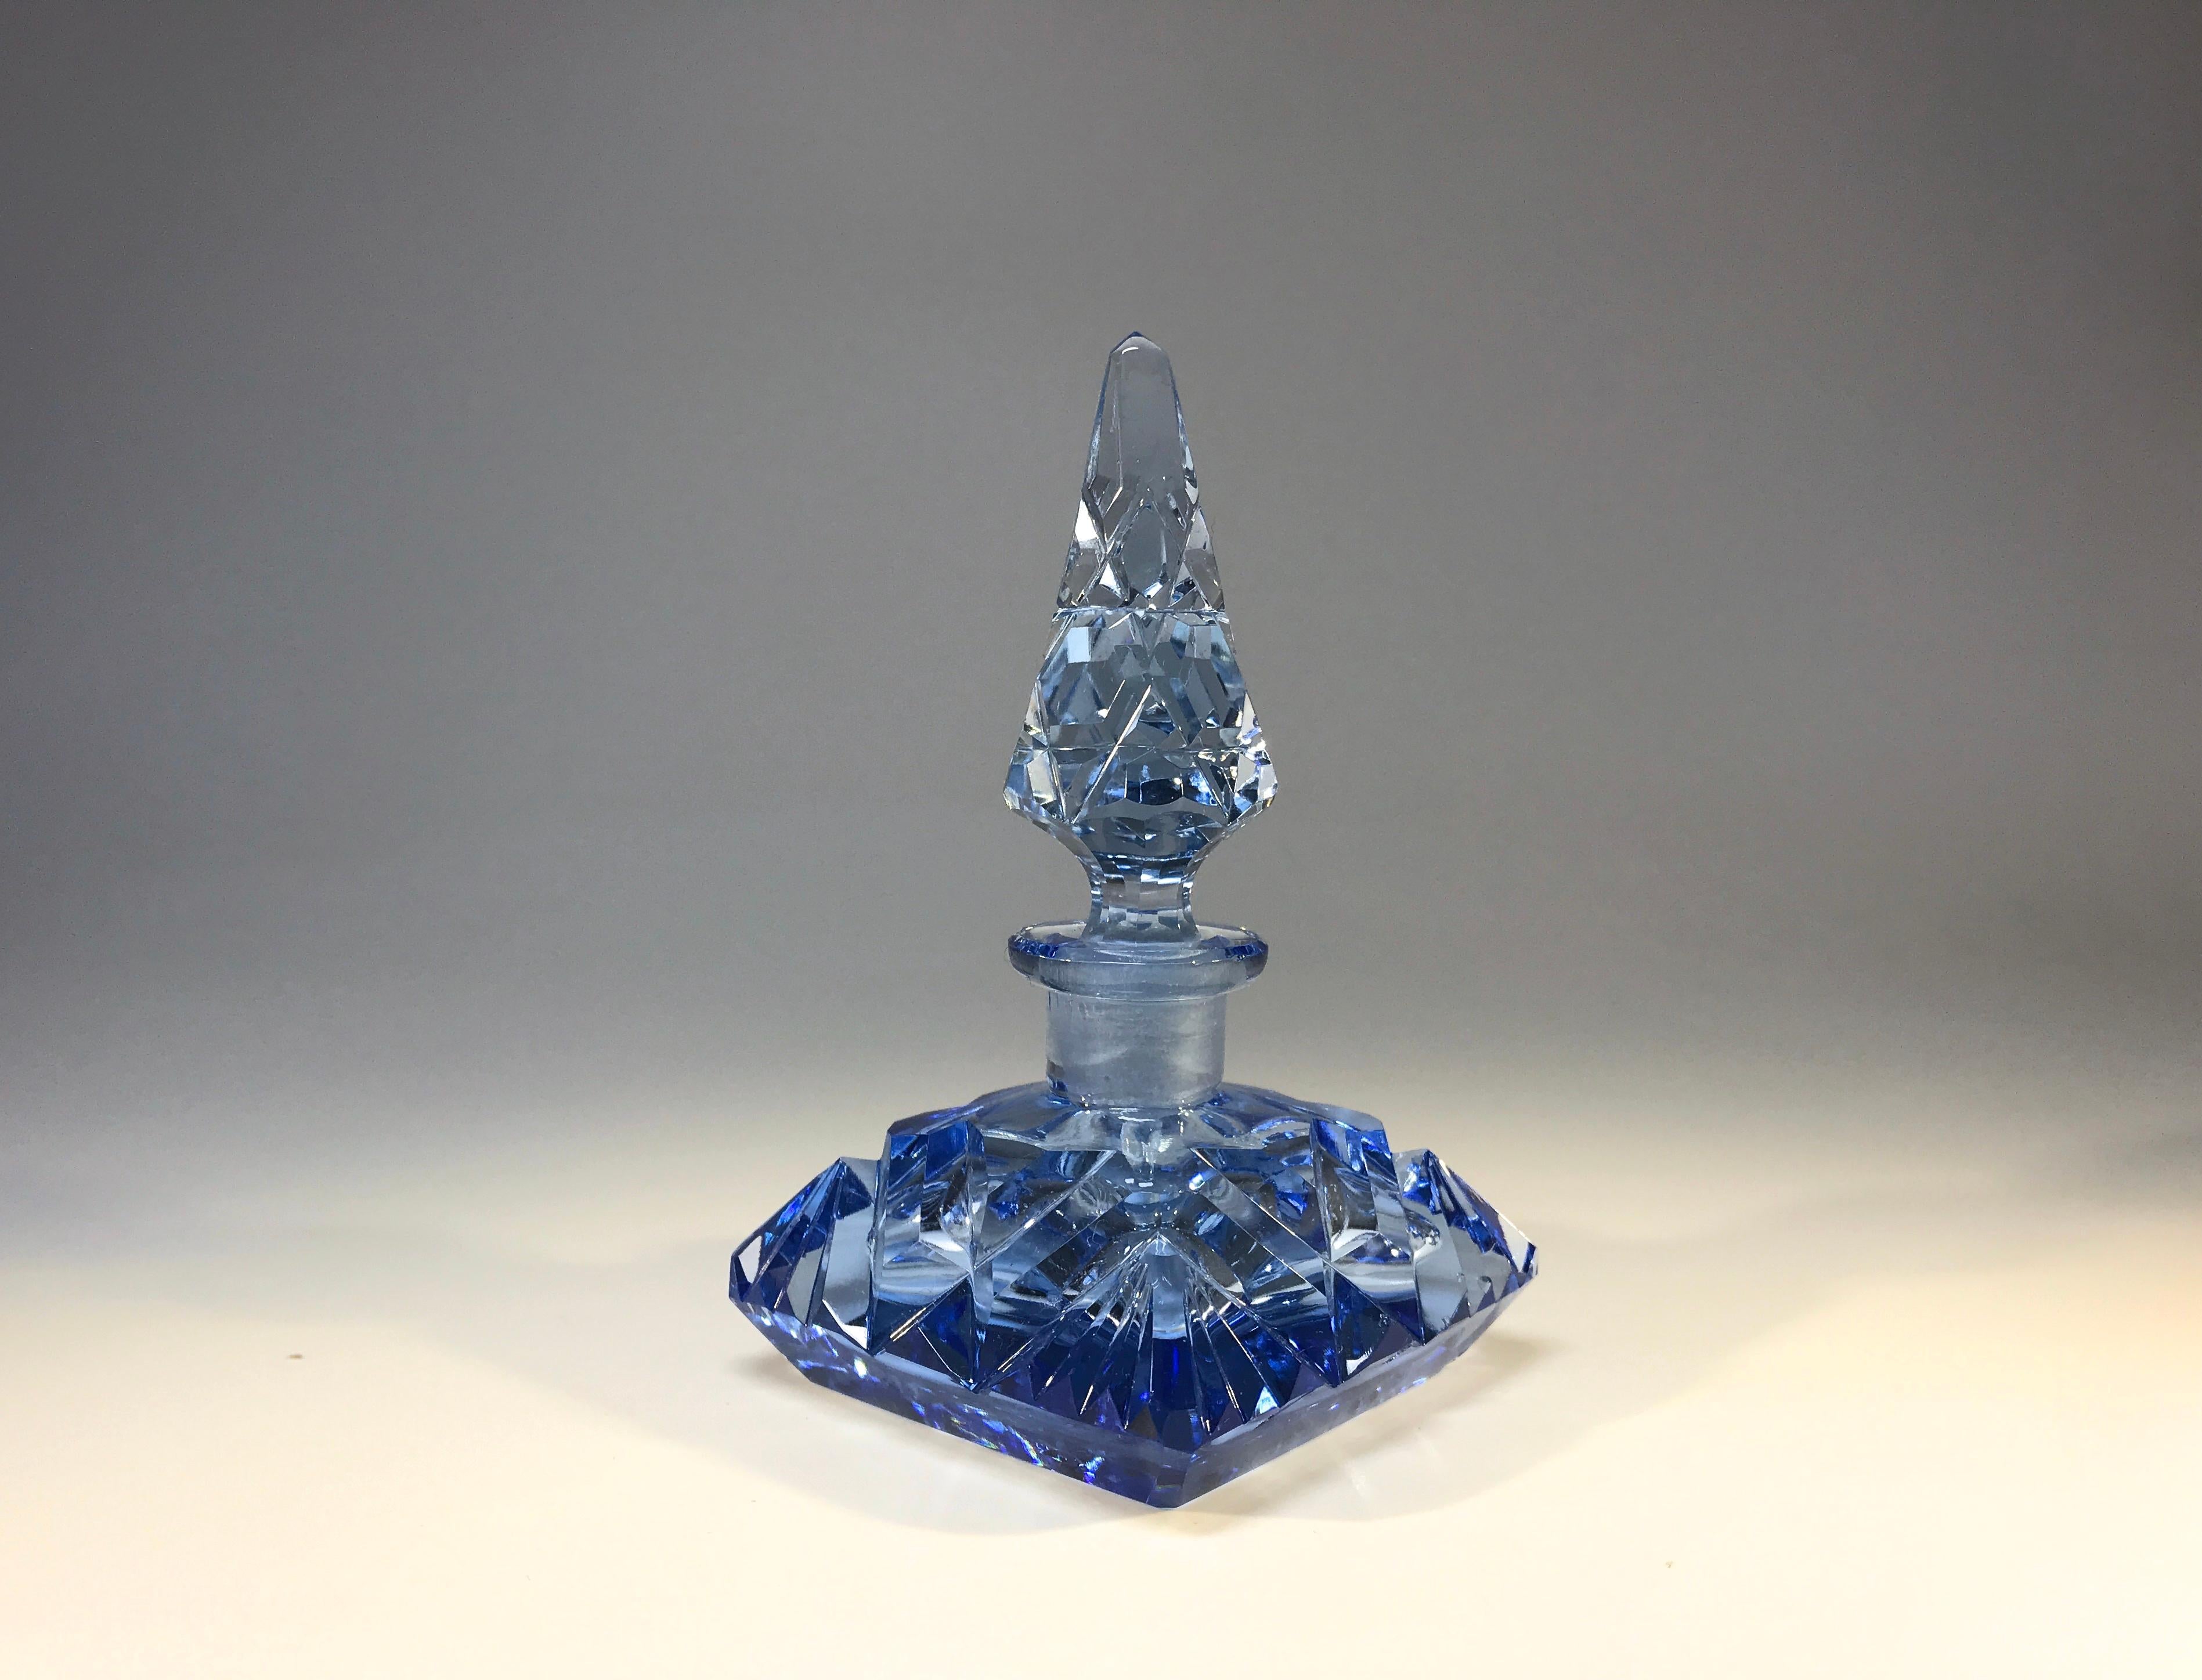 Delightful sapphire blue Czech crystal cushion shaped perfume bottle with dabber
Vintage Bohemian, Czech crystal,
circa 1930s
Measures: Height 4 inch, width 2.25 inch, depth 2.25 inch
In very good condition. One minute fleabite to corner of